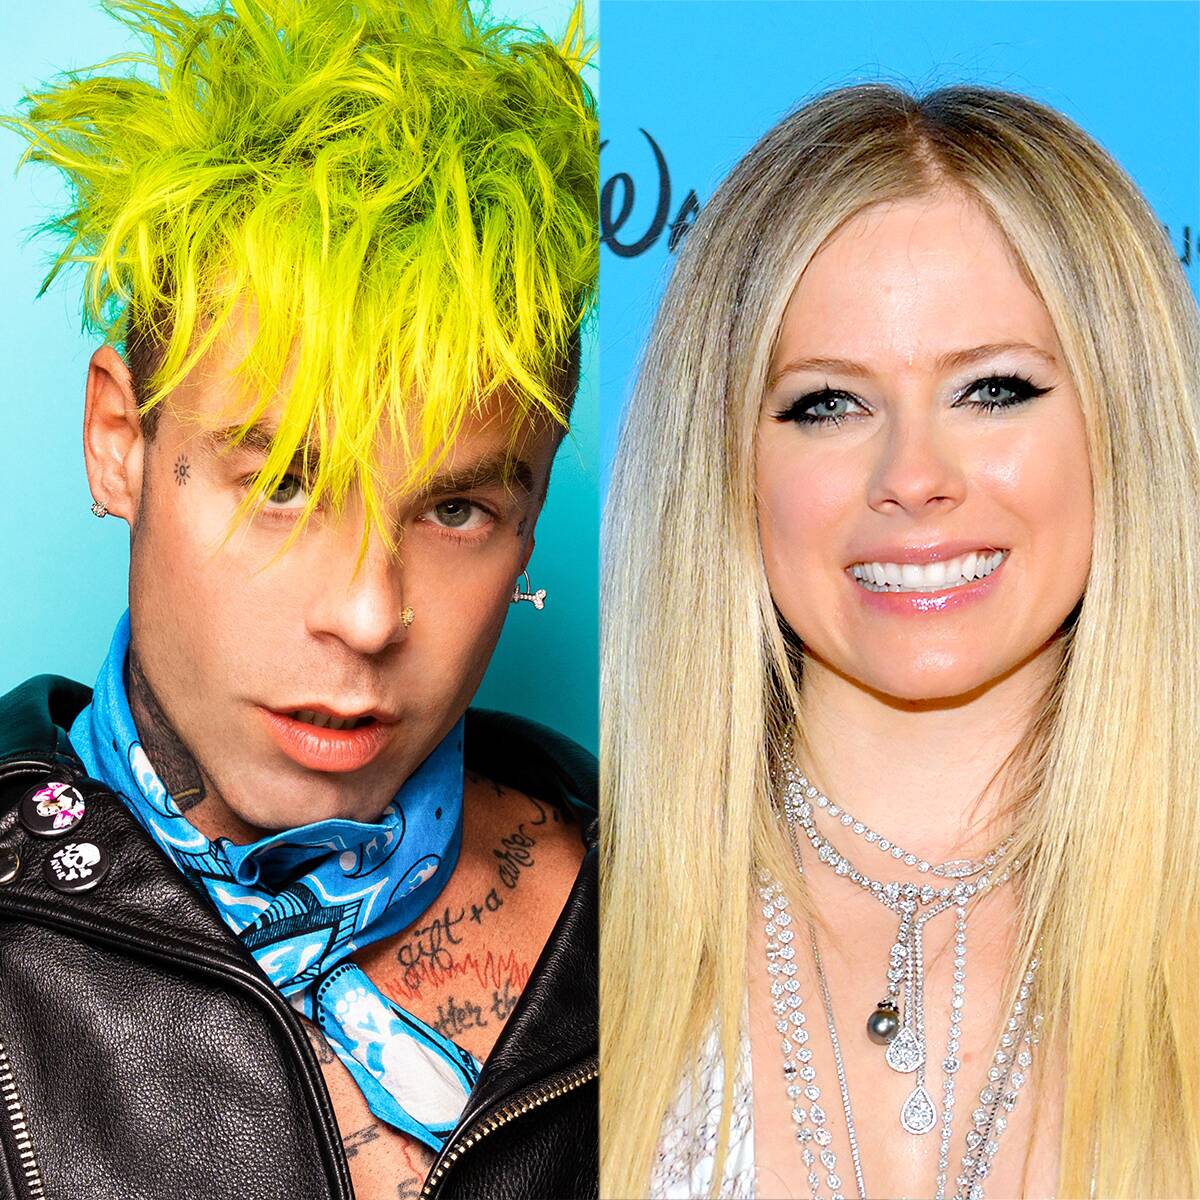 Avril Lavigne and Mod Sun Look Cozy at His Album Release Party Ahead of Valentine's Day